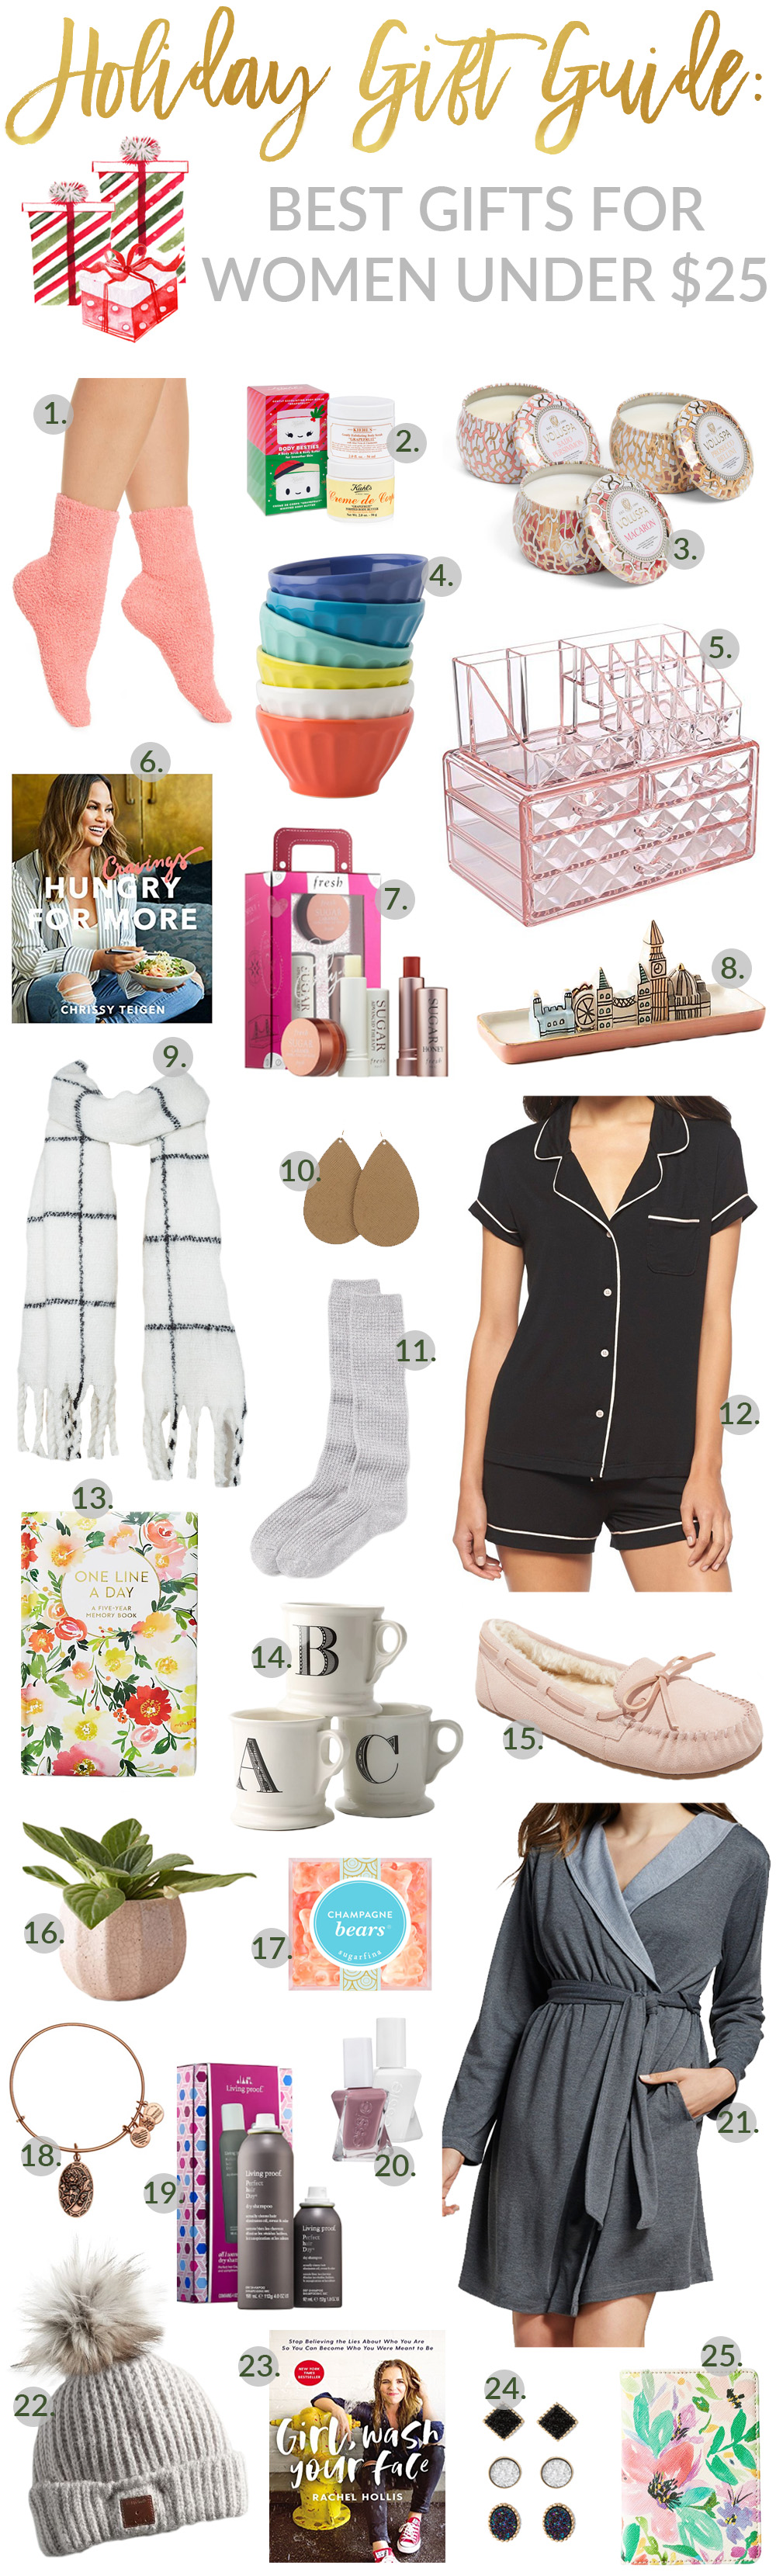 Gift Guide: Under $50 + $25  Connecticut Fashion and Lifestyle